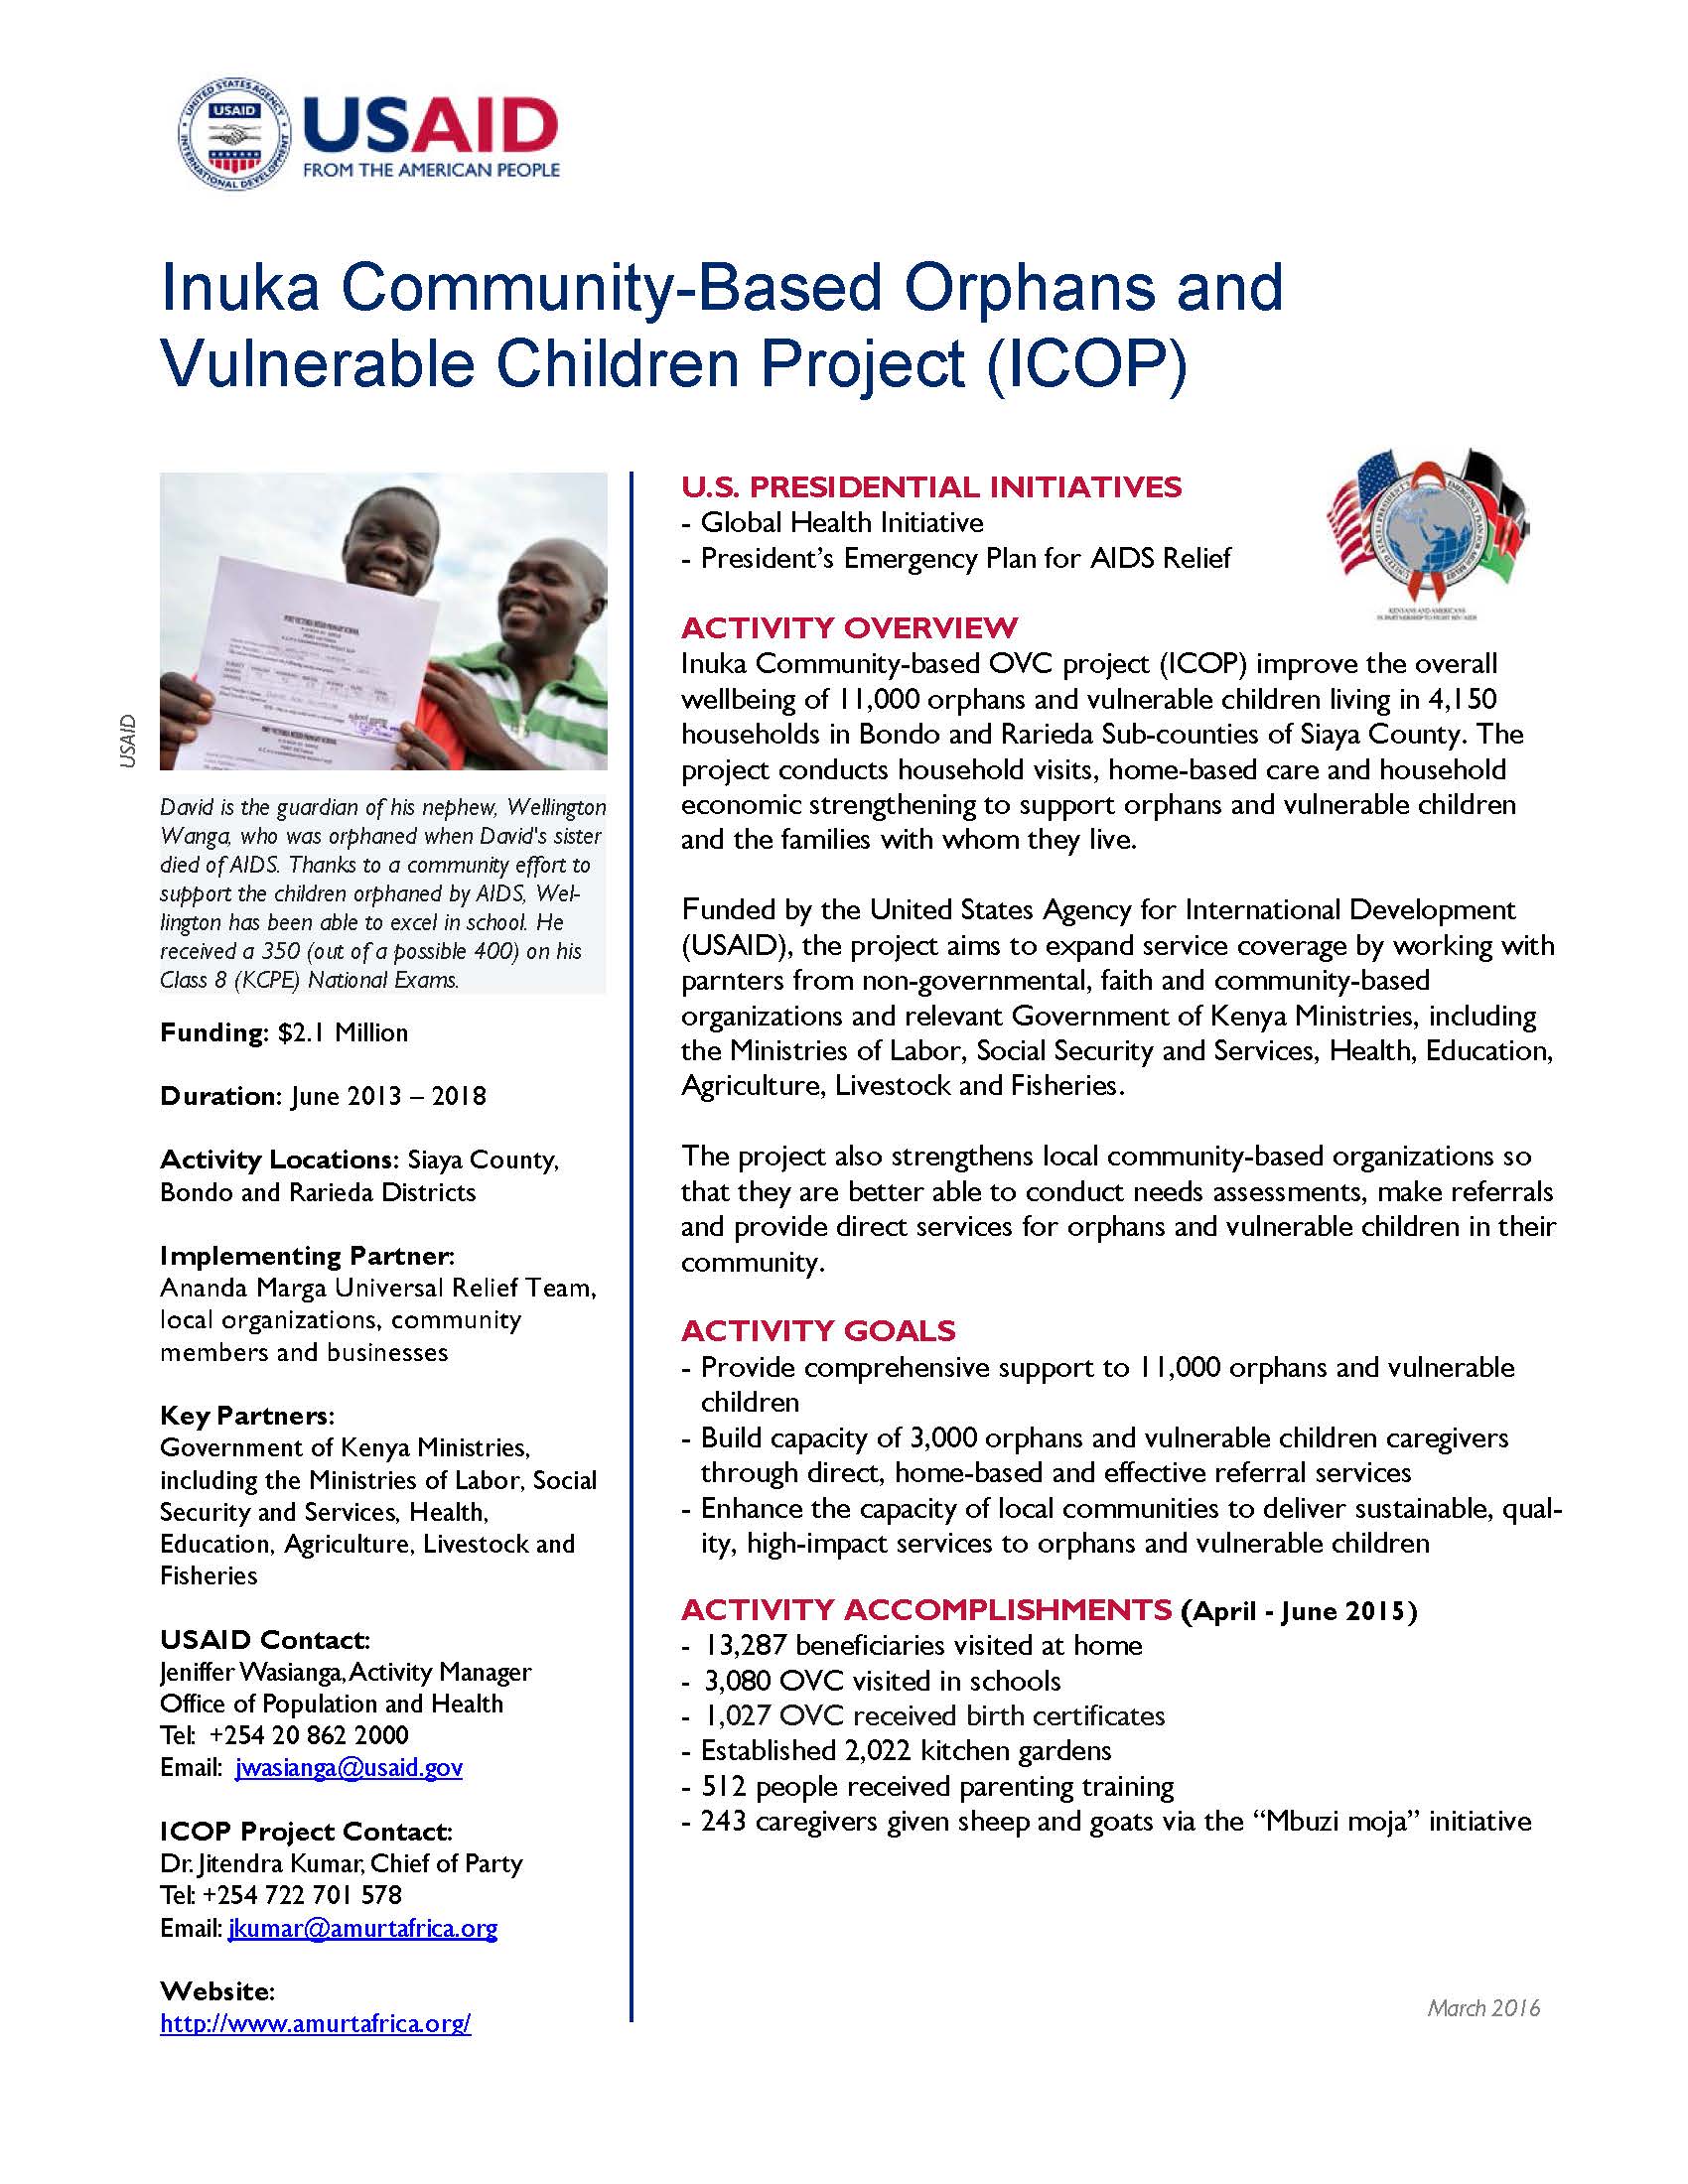 Inuka Community-Based Orphans and Vulnerable Children Project (ICOP)